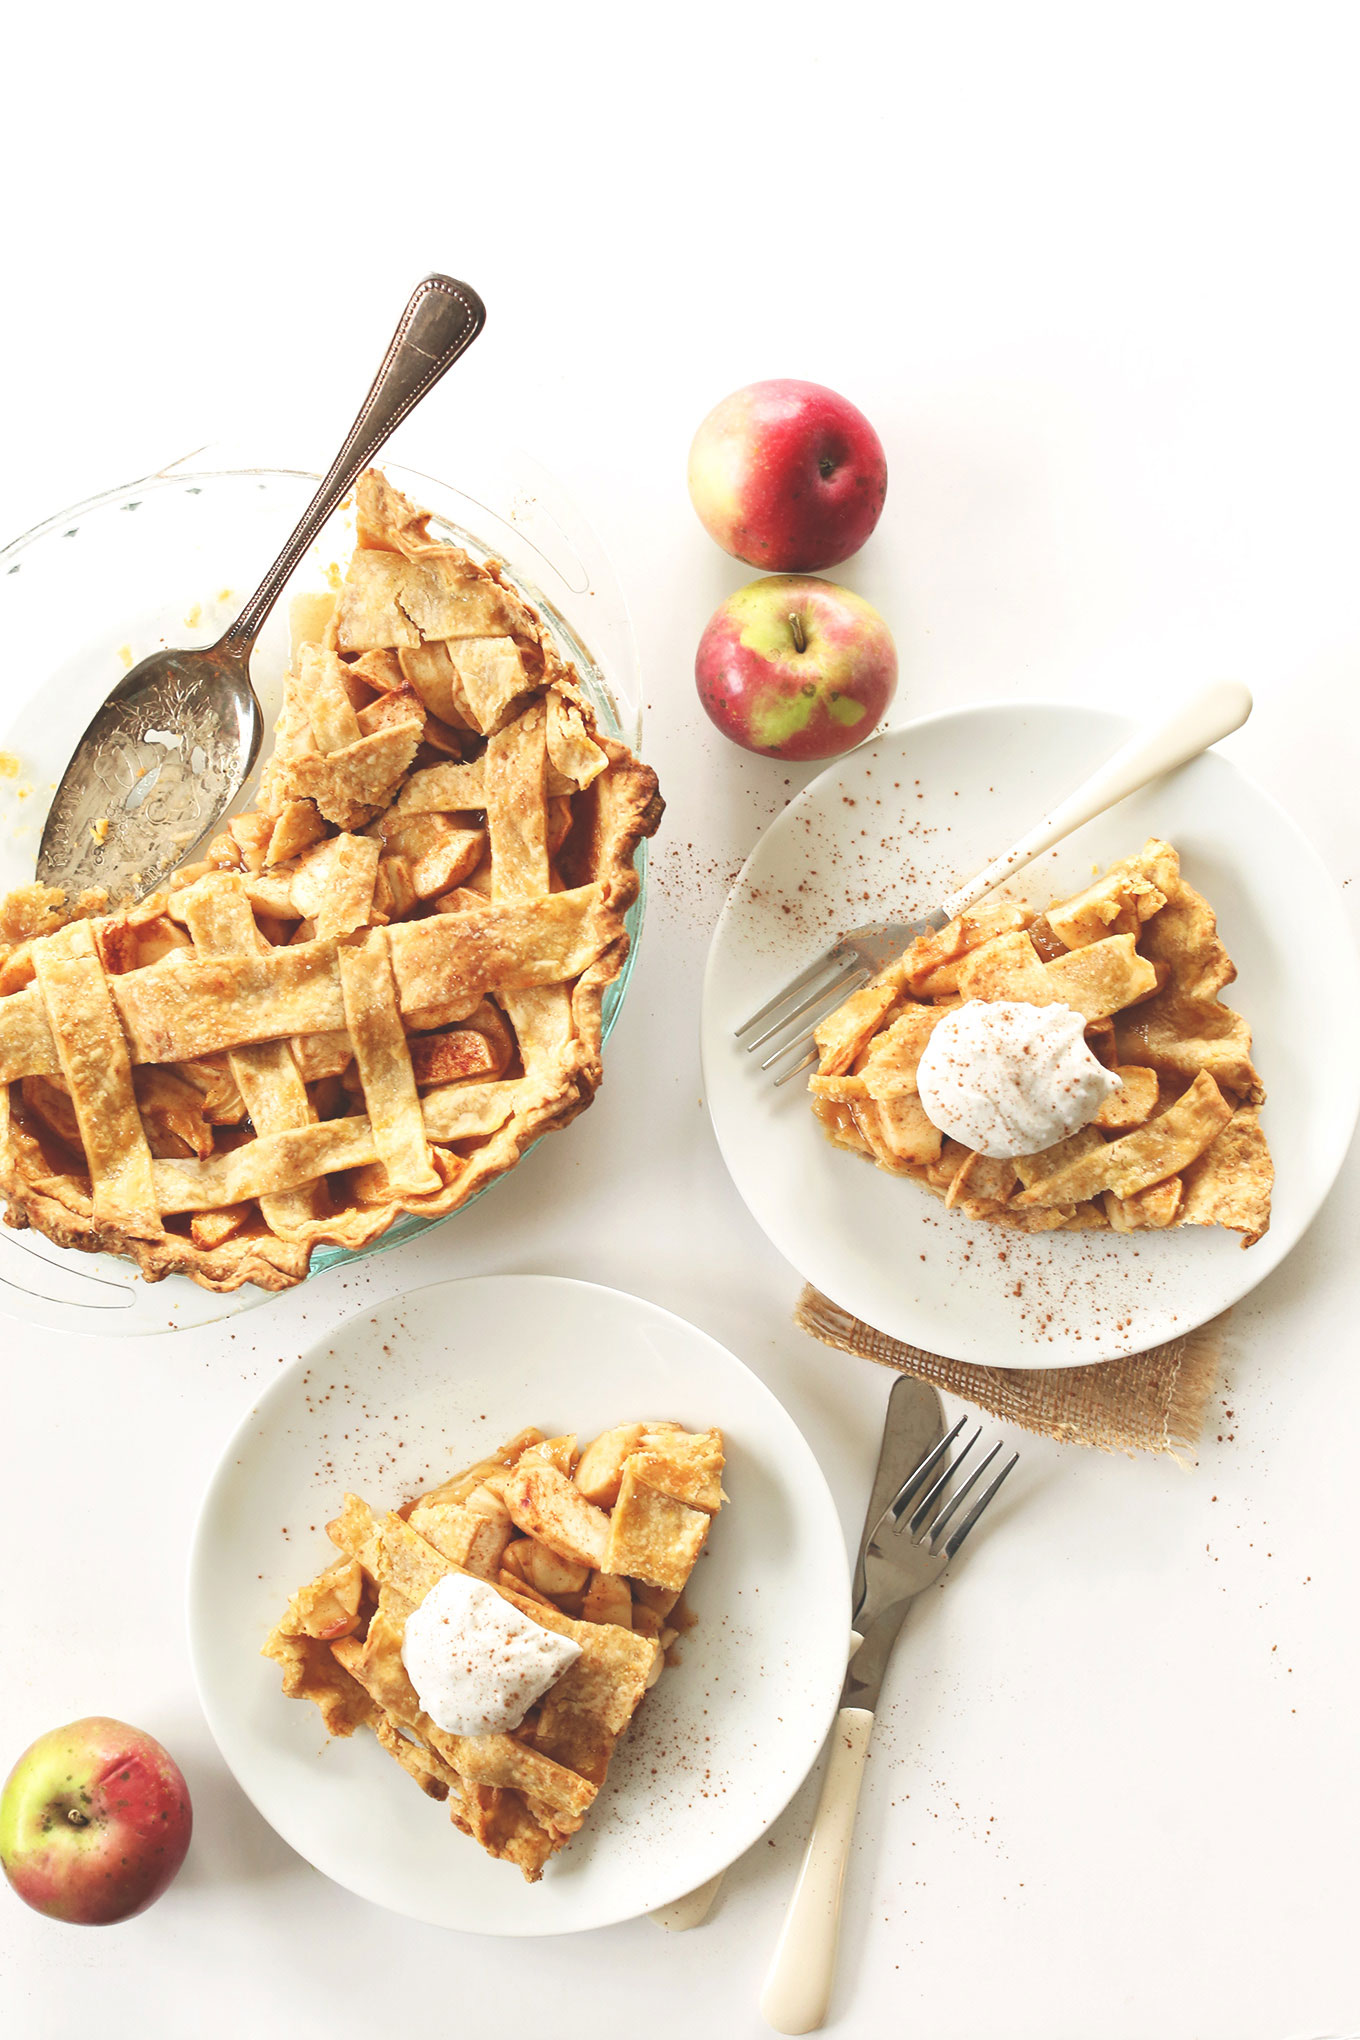 Slices of vegan apple pie with coconut whipped cream resting alongside the rest of the pie